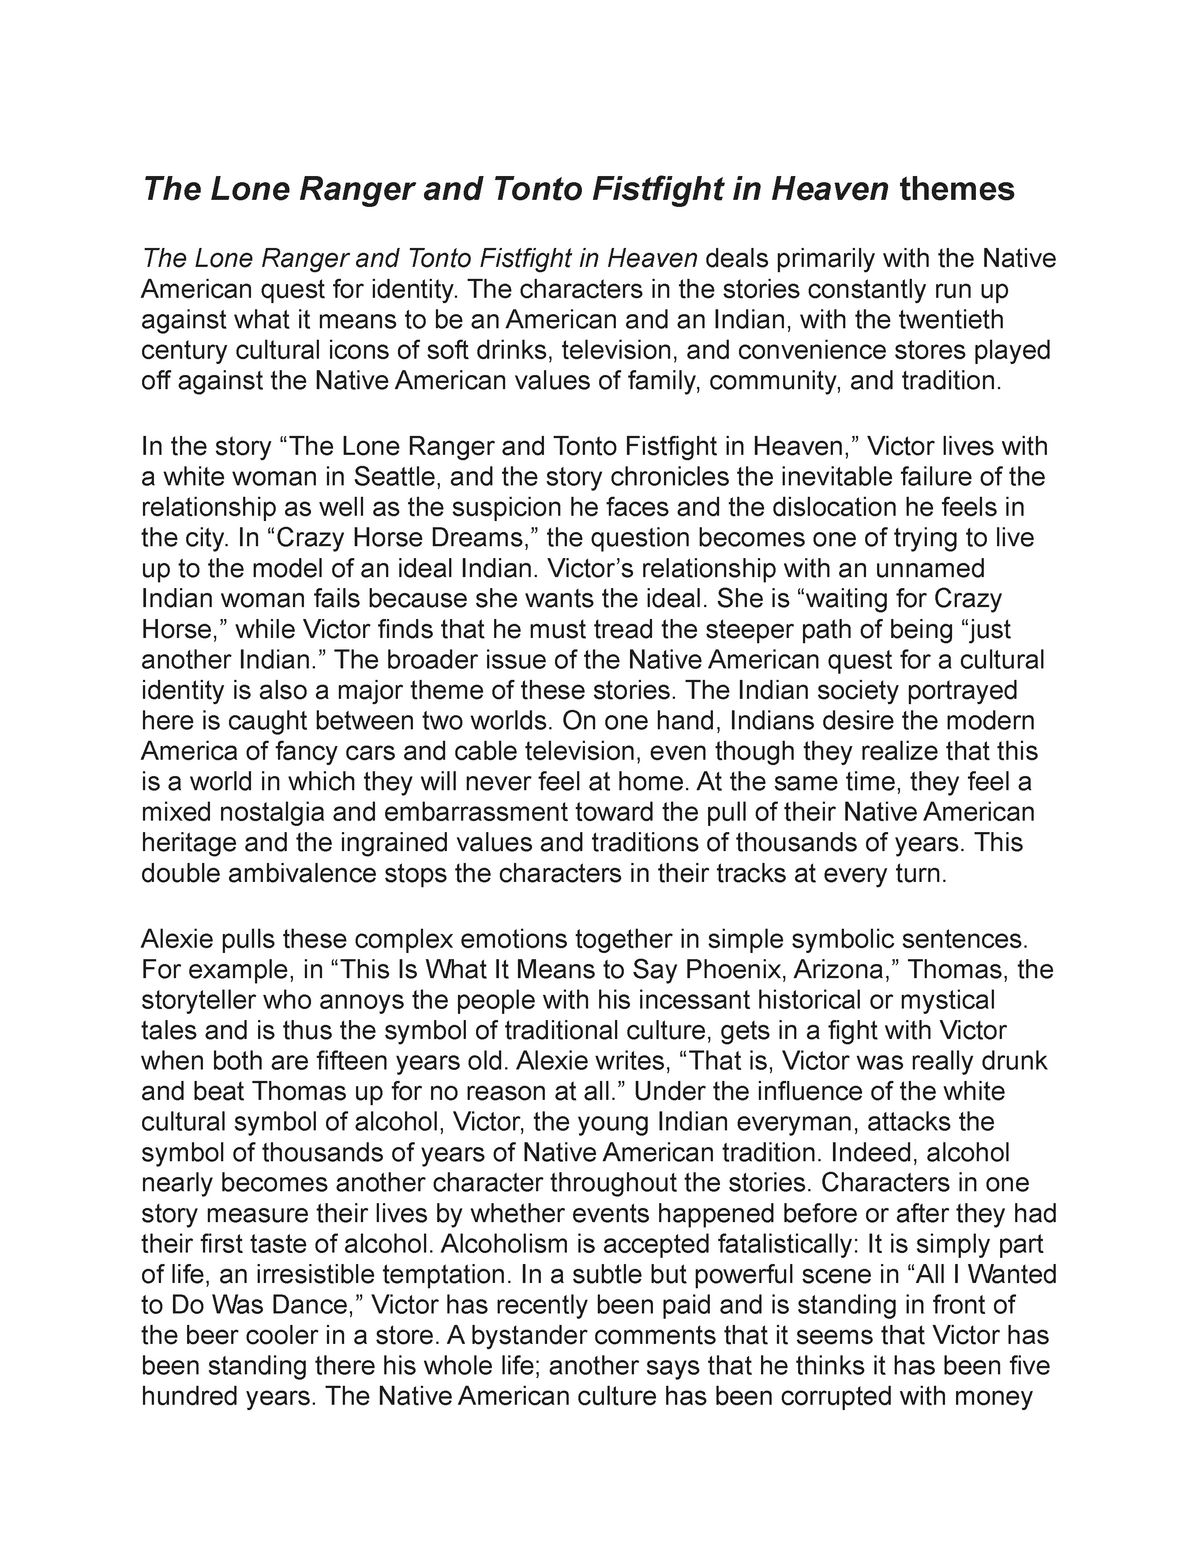 the lone ranger and tonto fistfight in heaven full text